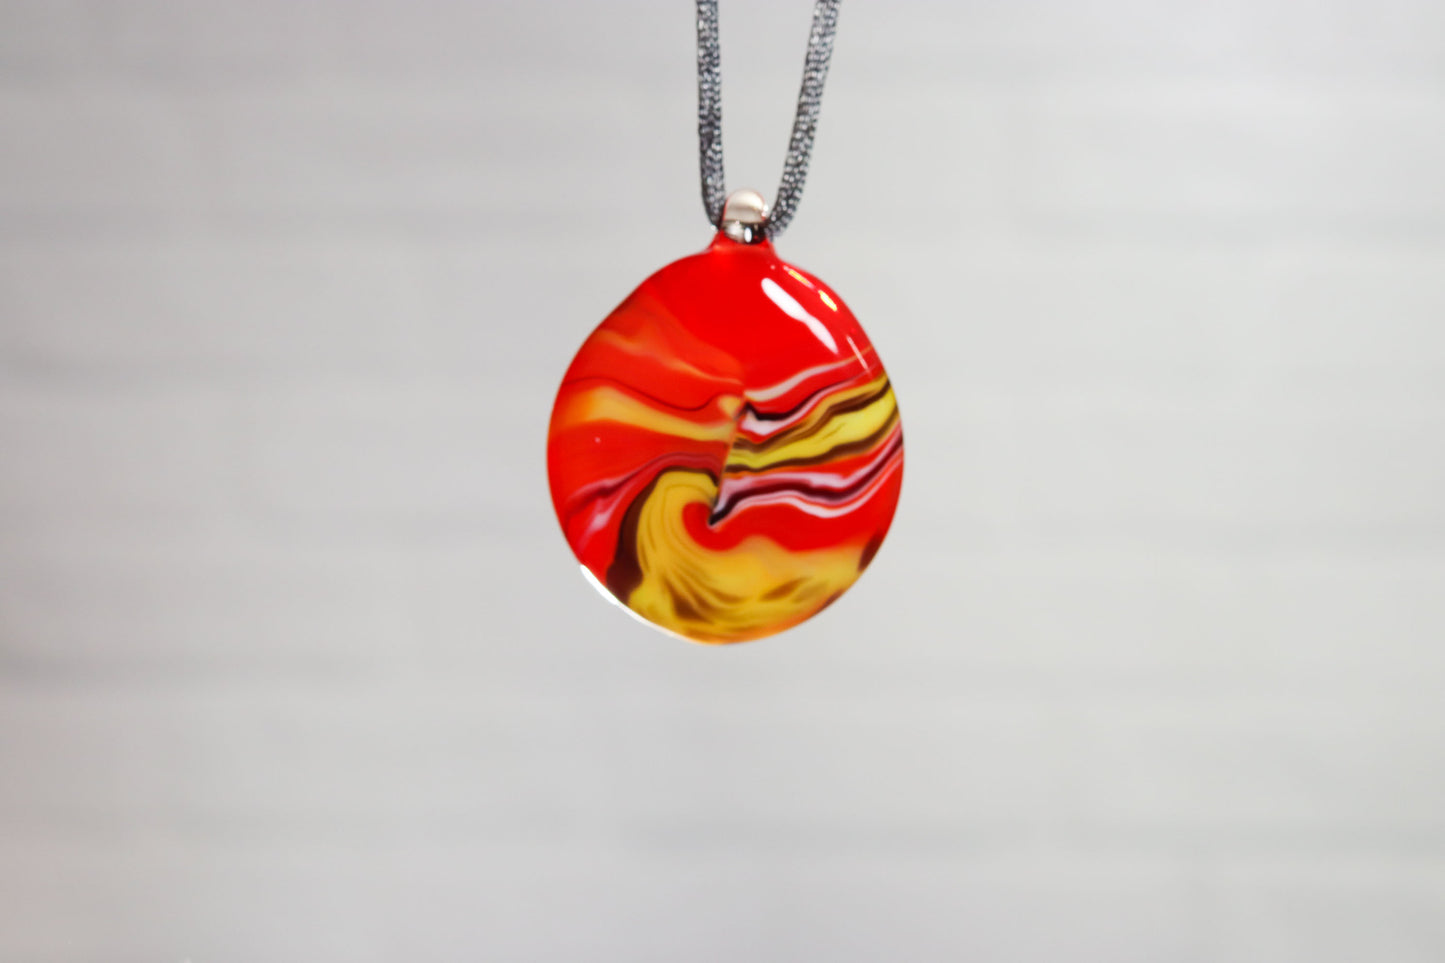 Glass Necklace #19 Red Yellow Black GN19-R-Y-W-BK